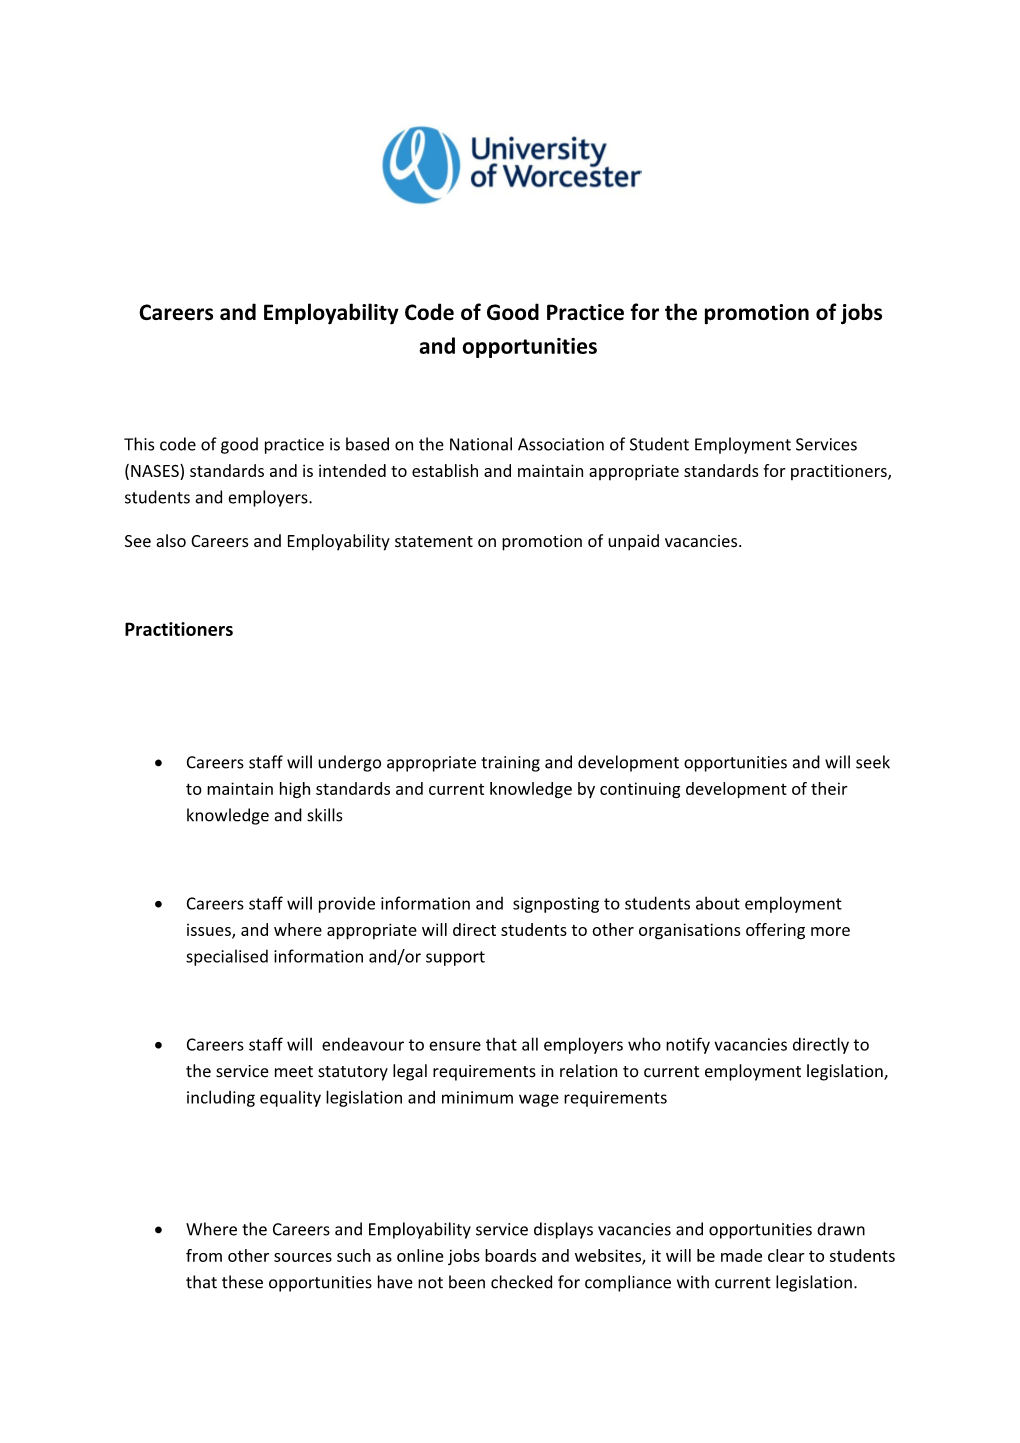 Careers and Employability Code of Good Practice for the Promotion of Jobs and Opportunities